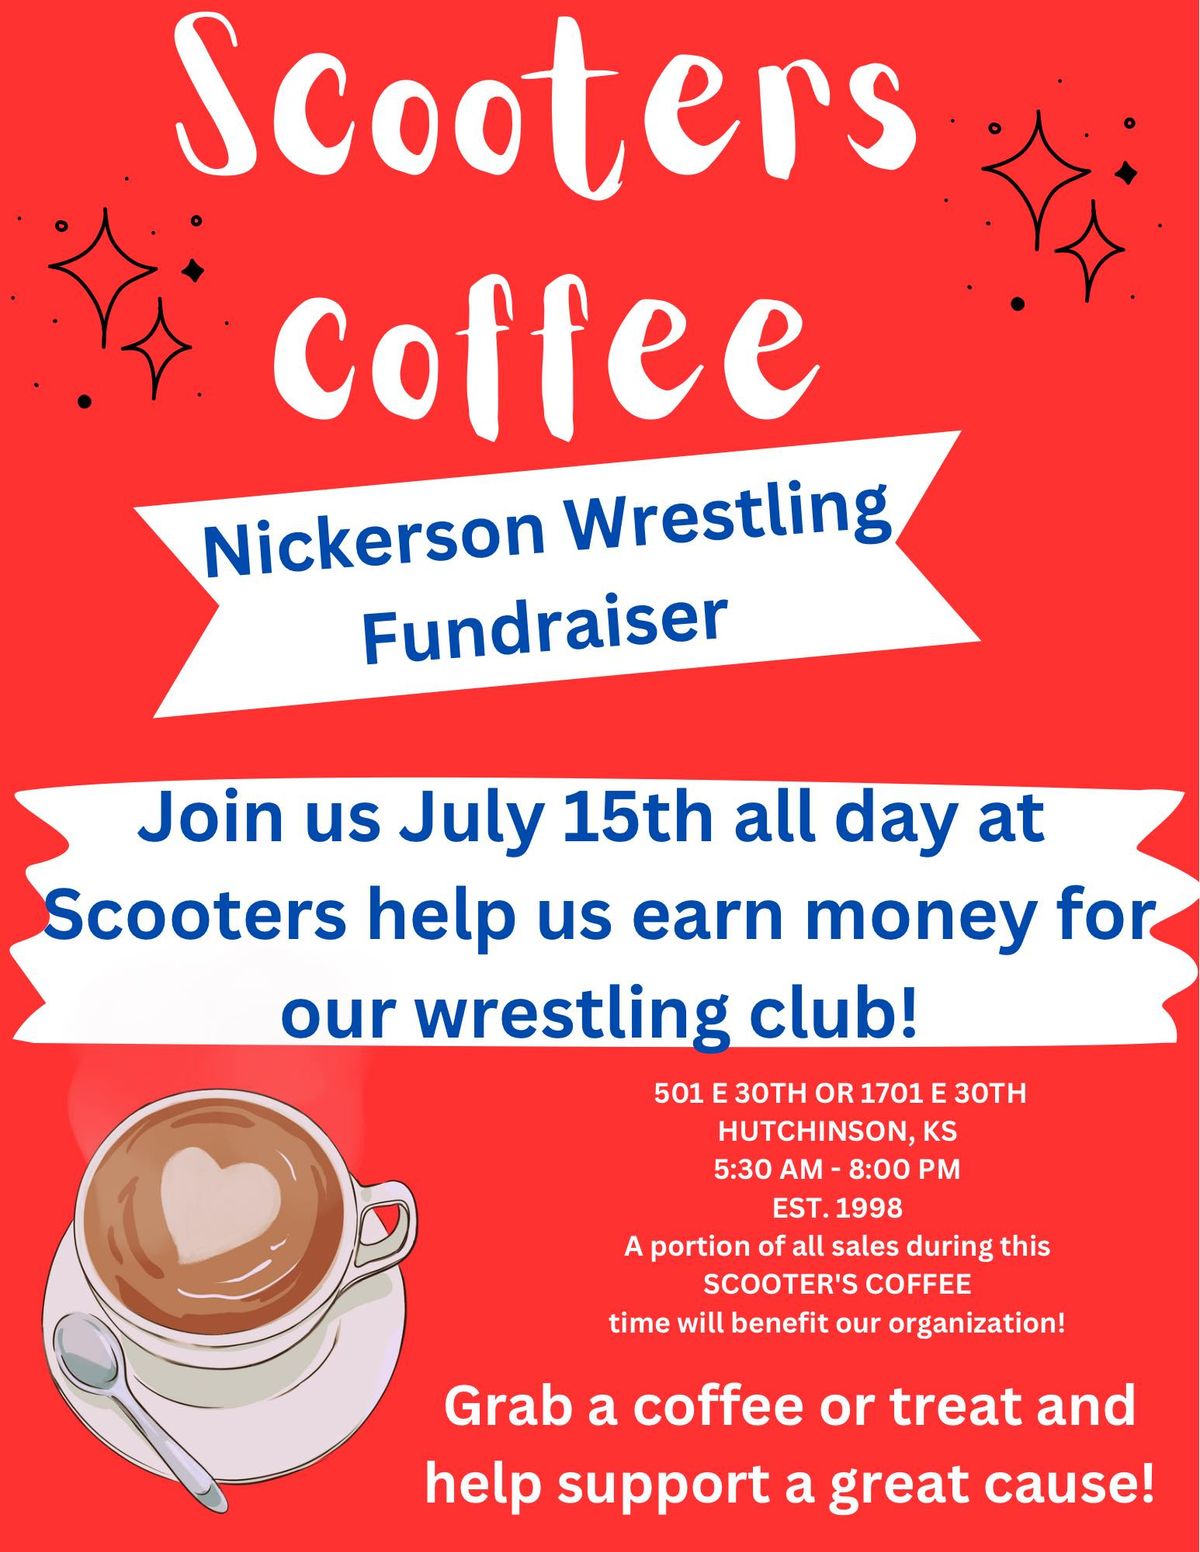 Scooters coffee for Nickerson Wrestling! 